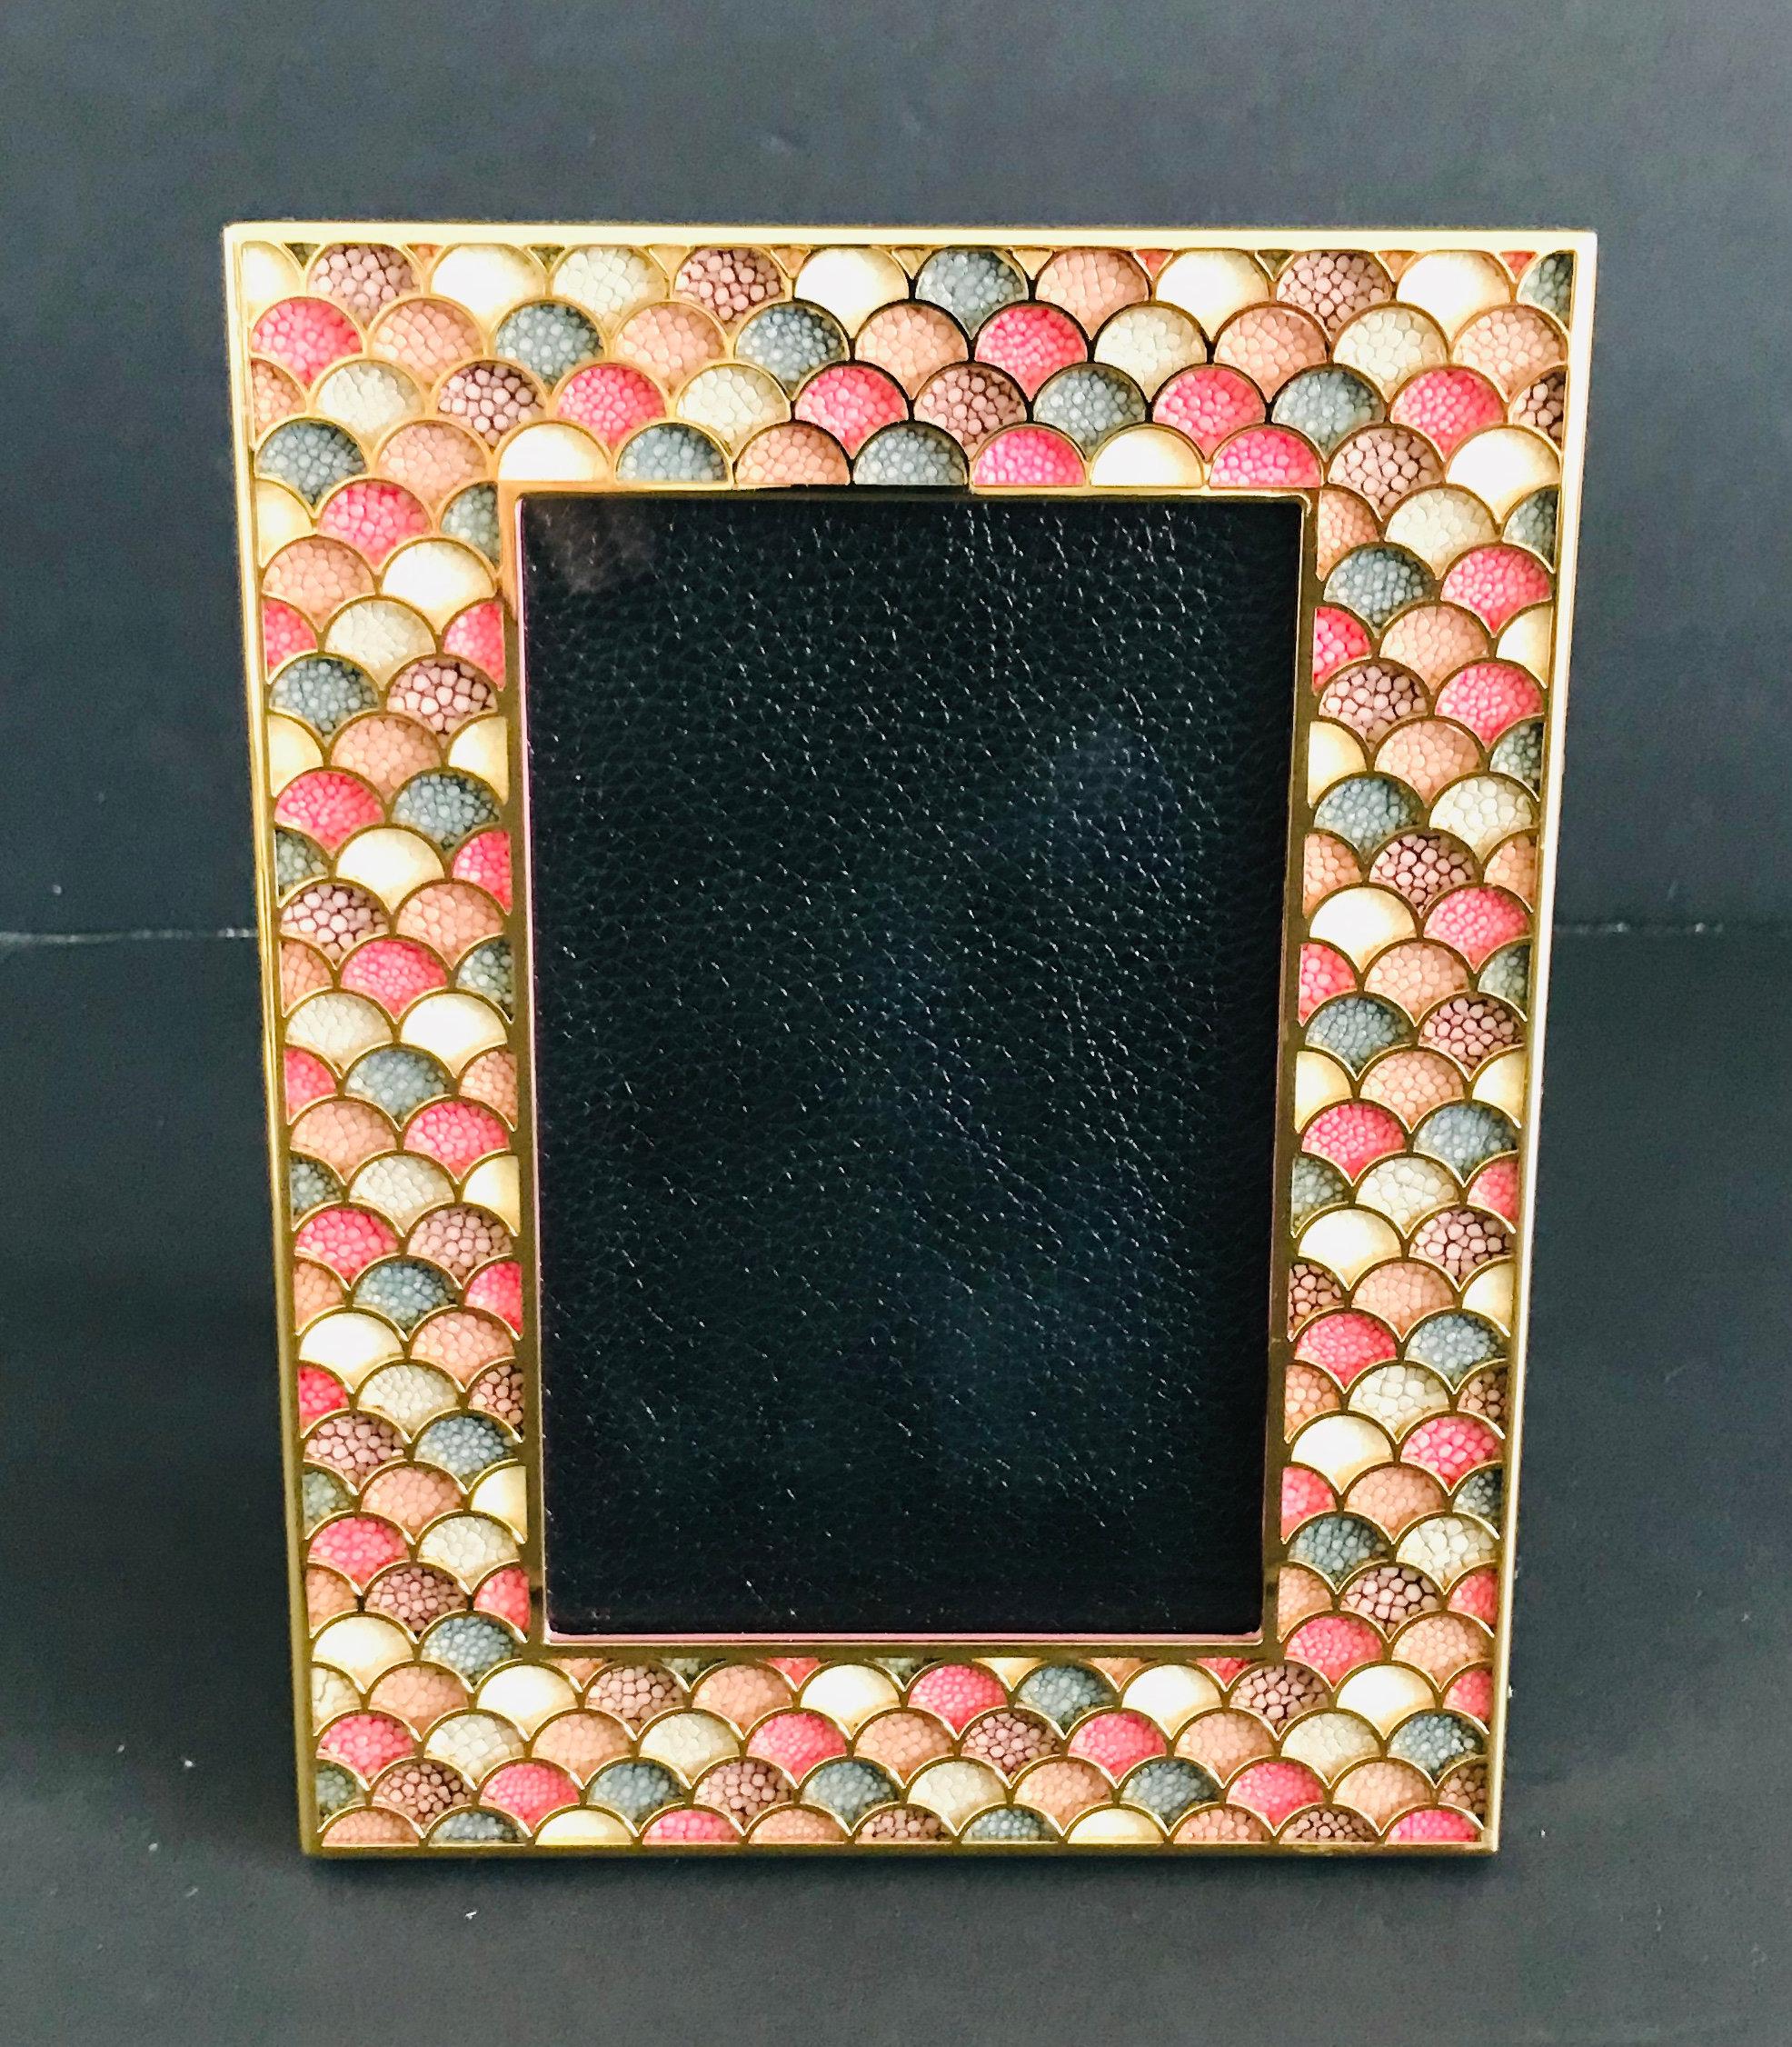 Multi-color shagreen leather and 24-karat gold-plated photo frame by Fabio Ltd
Height: 8 inches / Width: 6 inches / Depth: 1 inch
Photo size: 4 inches by 6 inches
LAST 1 in stock in Los Angeles
Order Reference #: FABIOLTD PF26
This piece makes for